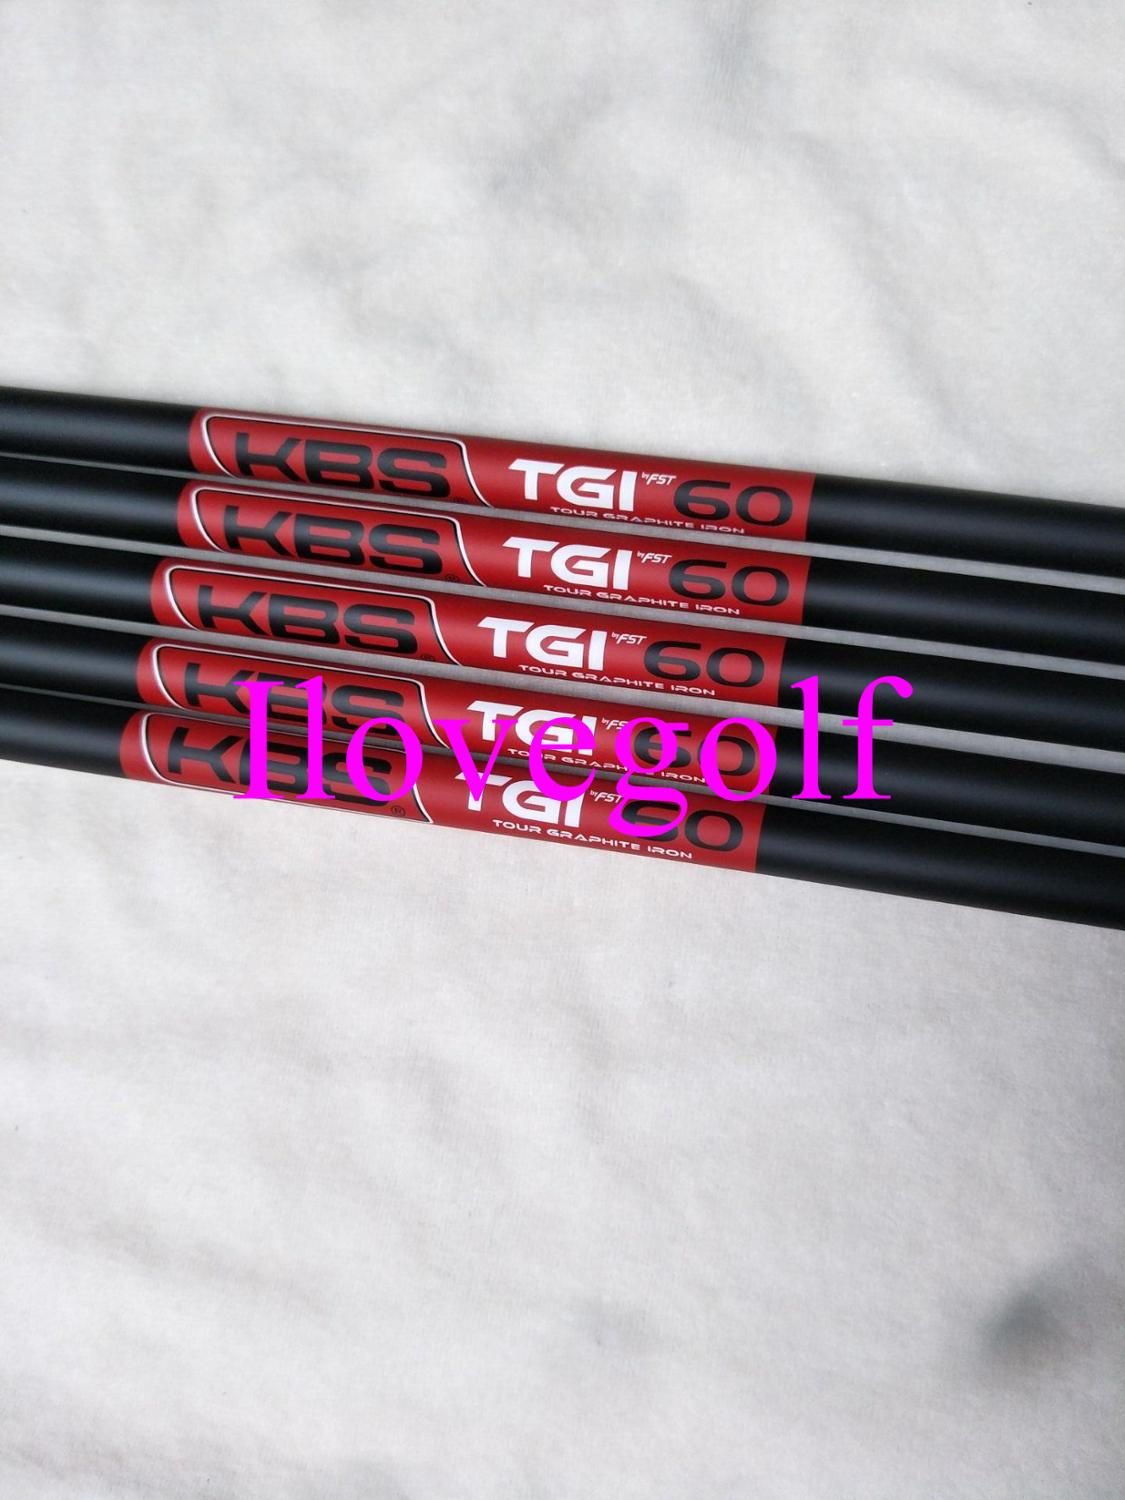 8PCS MP 1100 Golf Clubs Irons Set MP-1100 5-9PAS Regular/Stiff Steel/Graphite Shafts Including Headcovers DHL Free Shipping